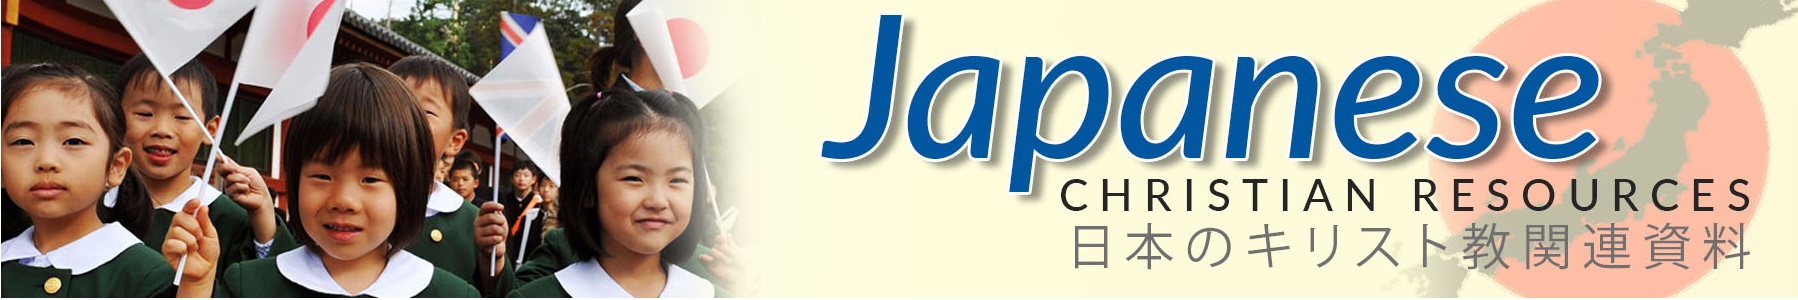 Japanese Christian Resources